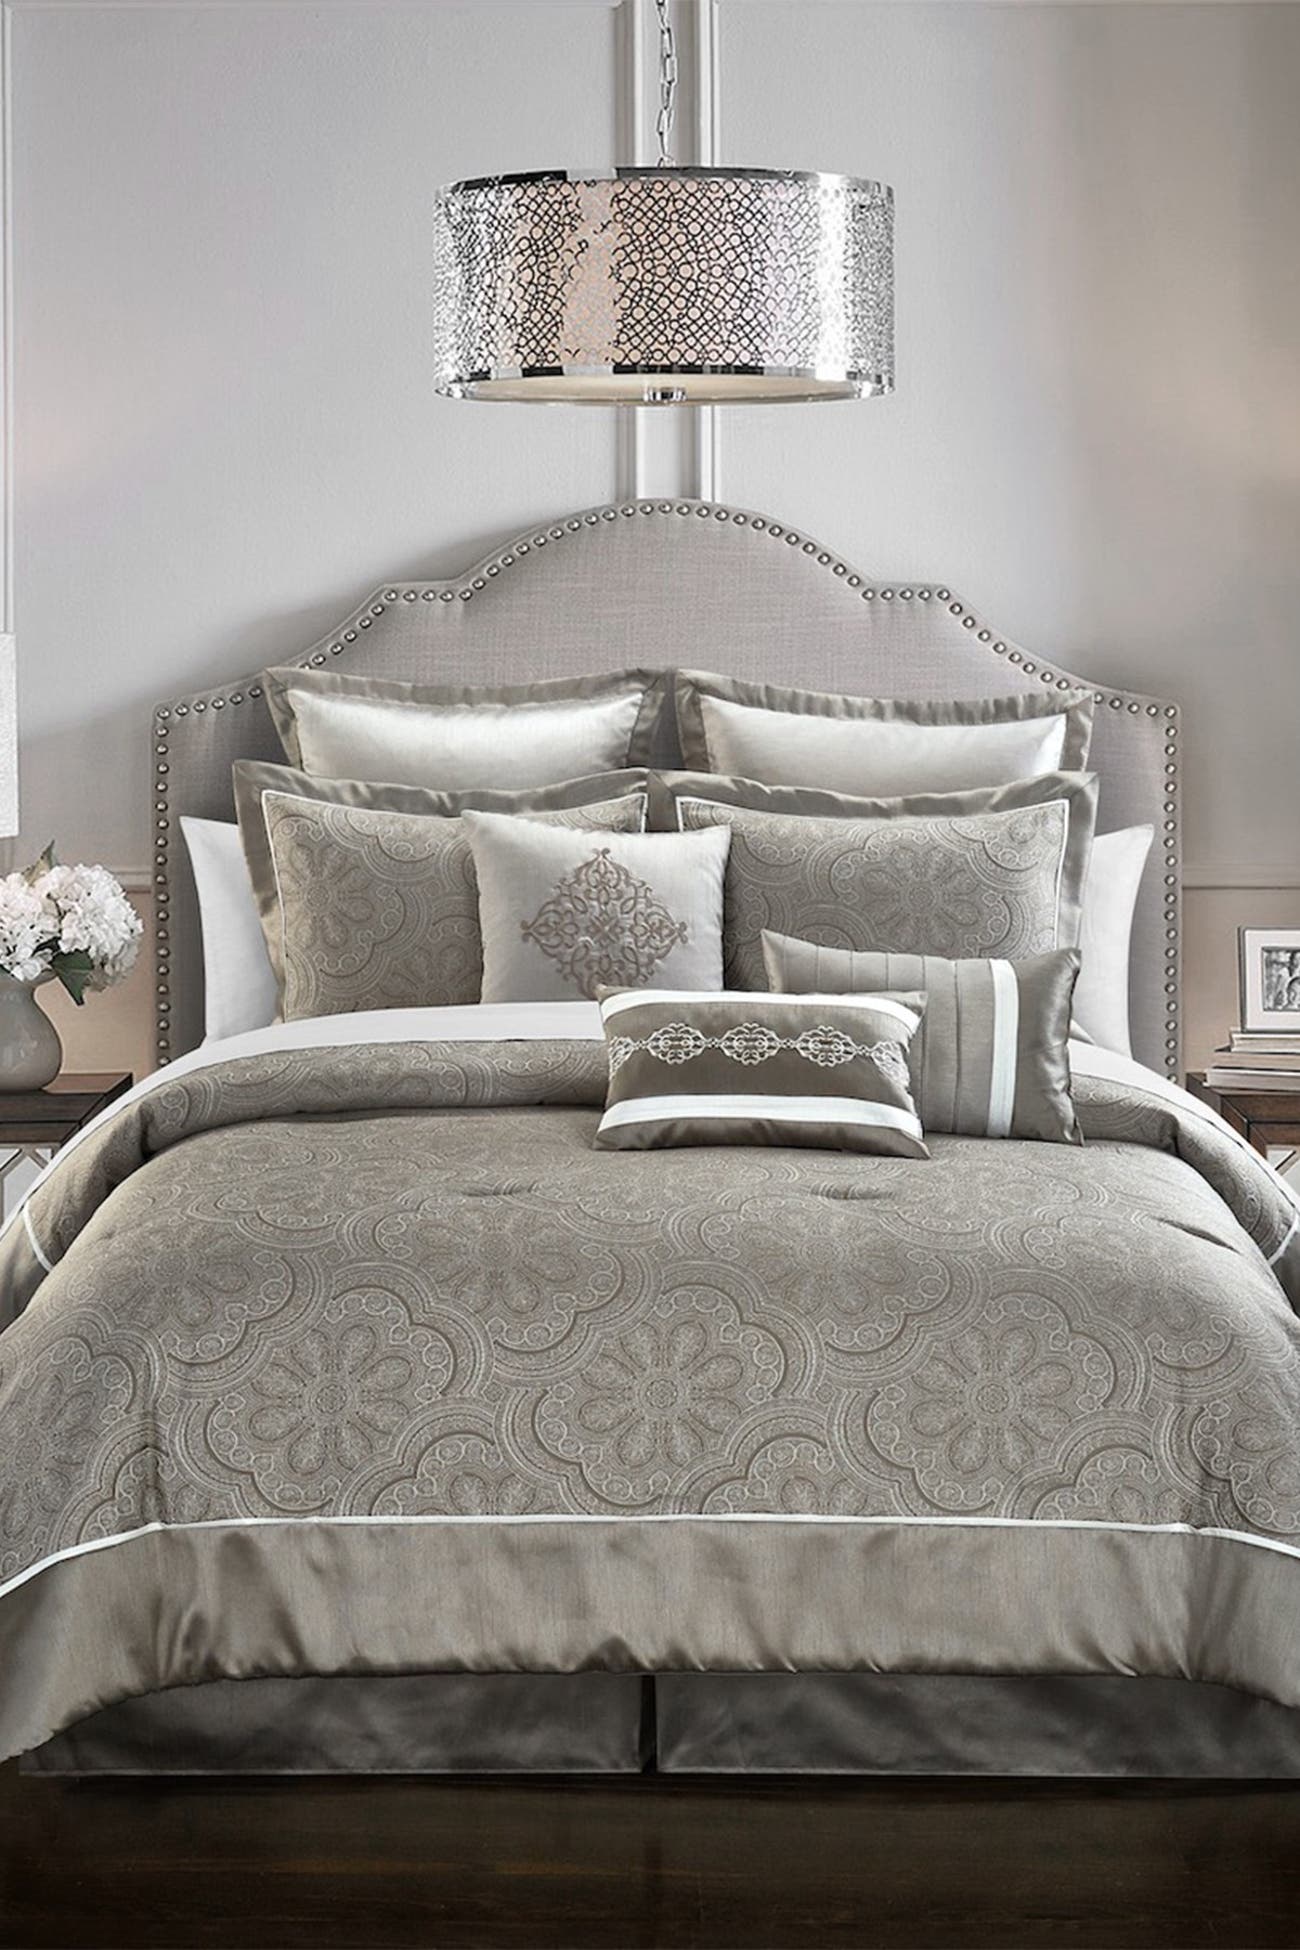 Chic Home Bedding | Merlie Jacquard Scroll Medallion Design With Solid ...